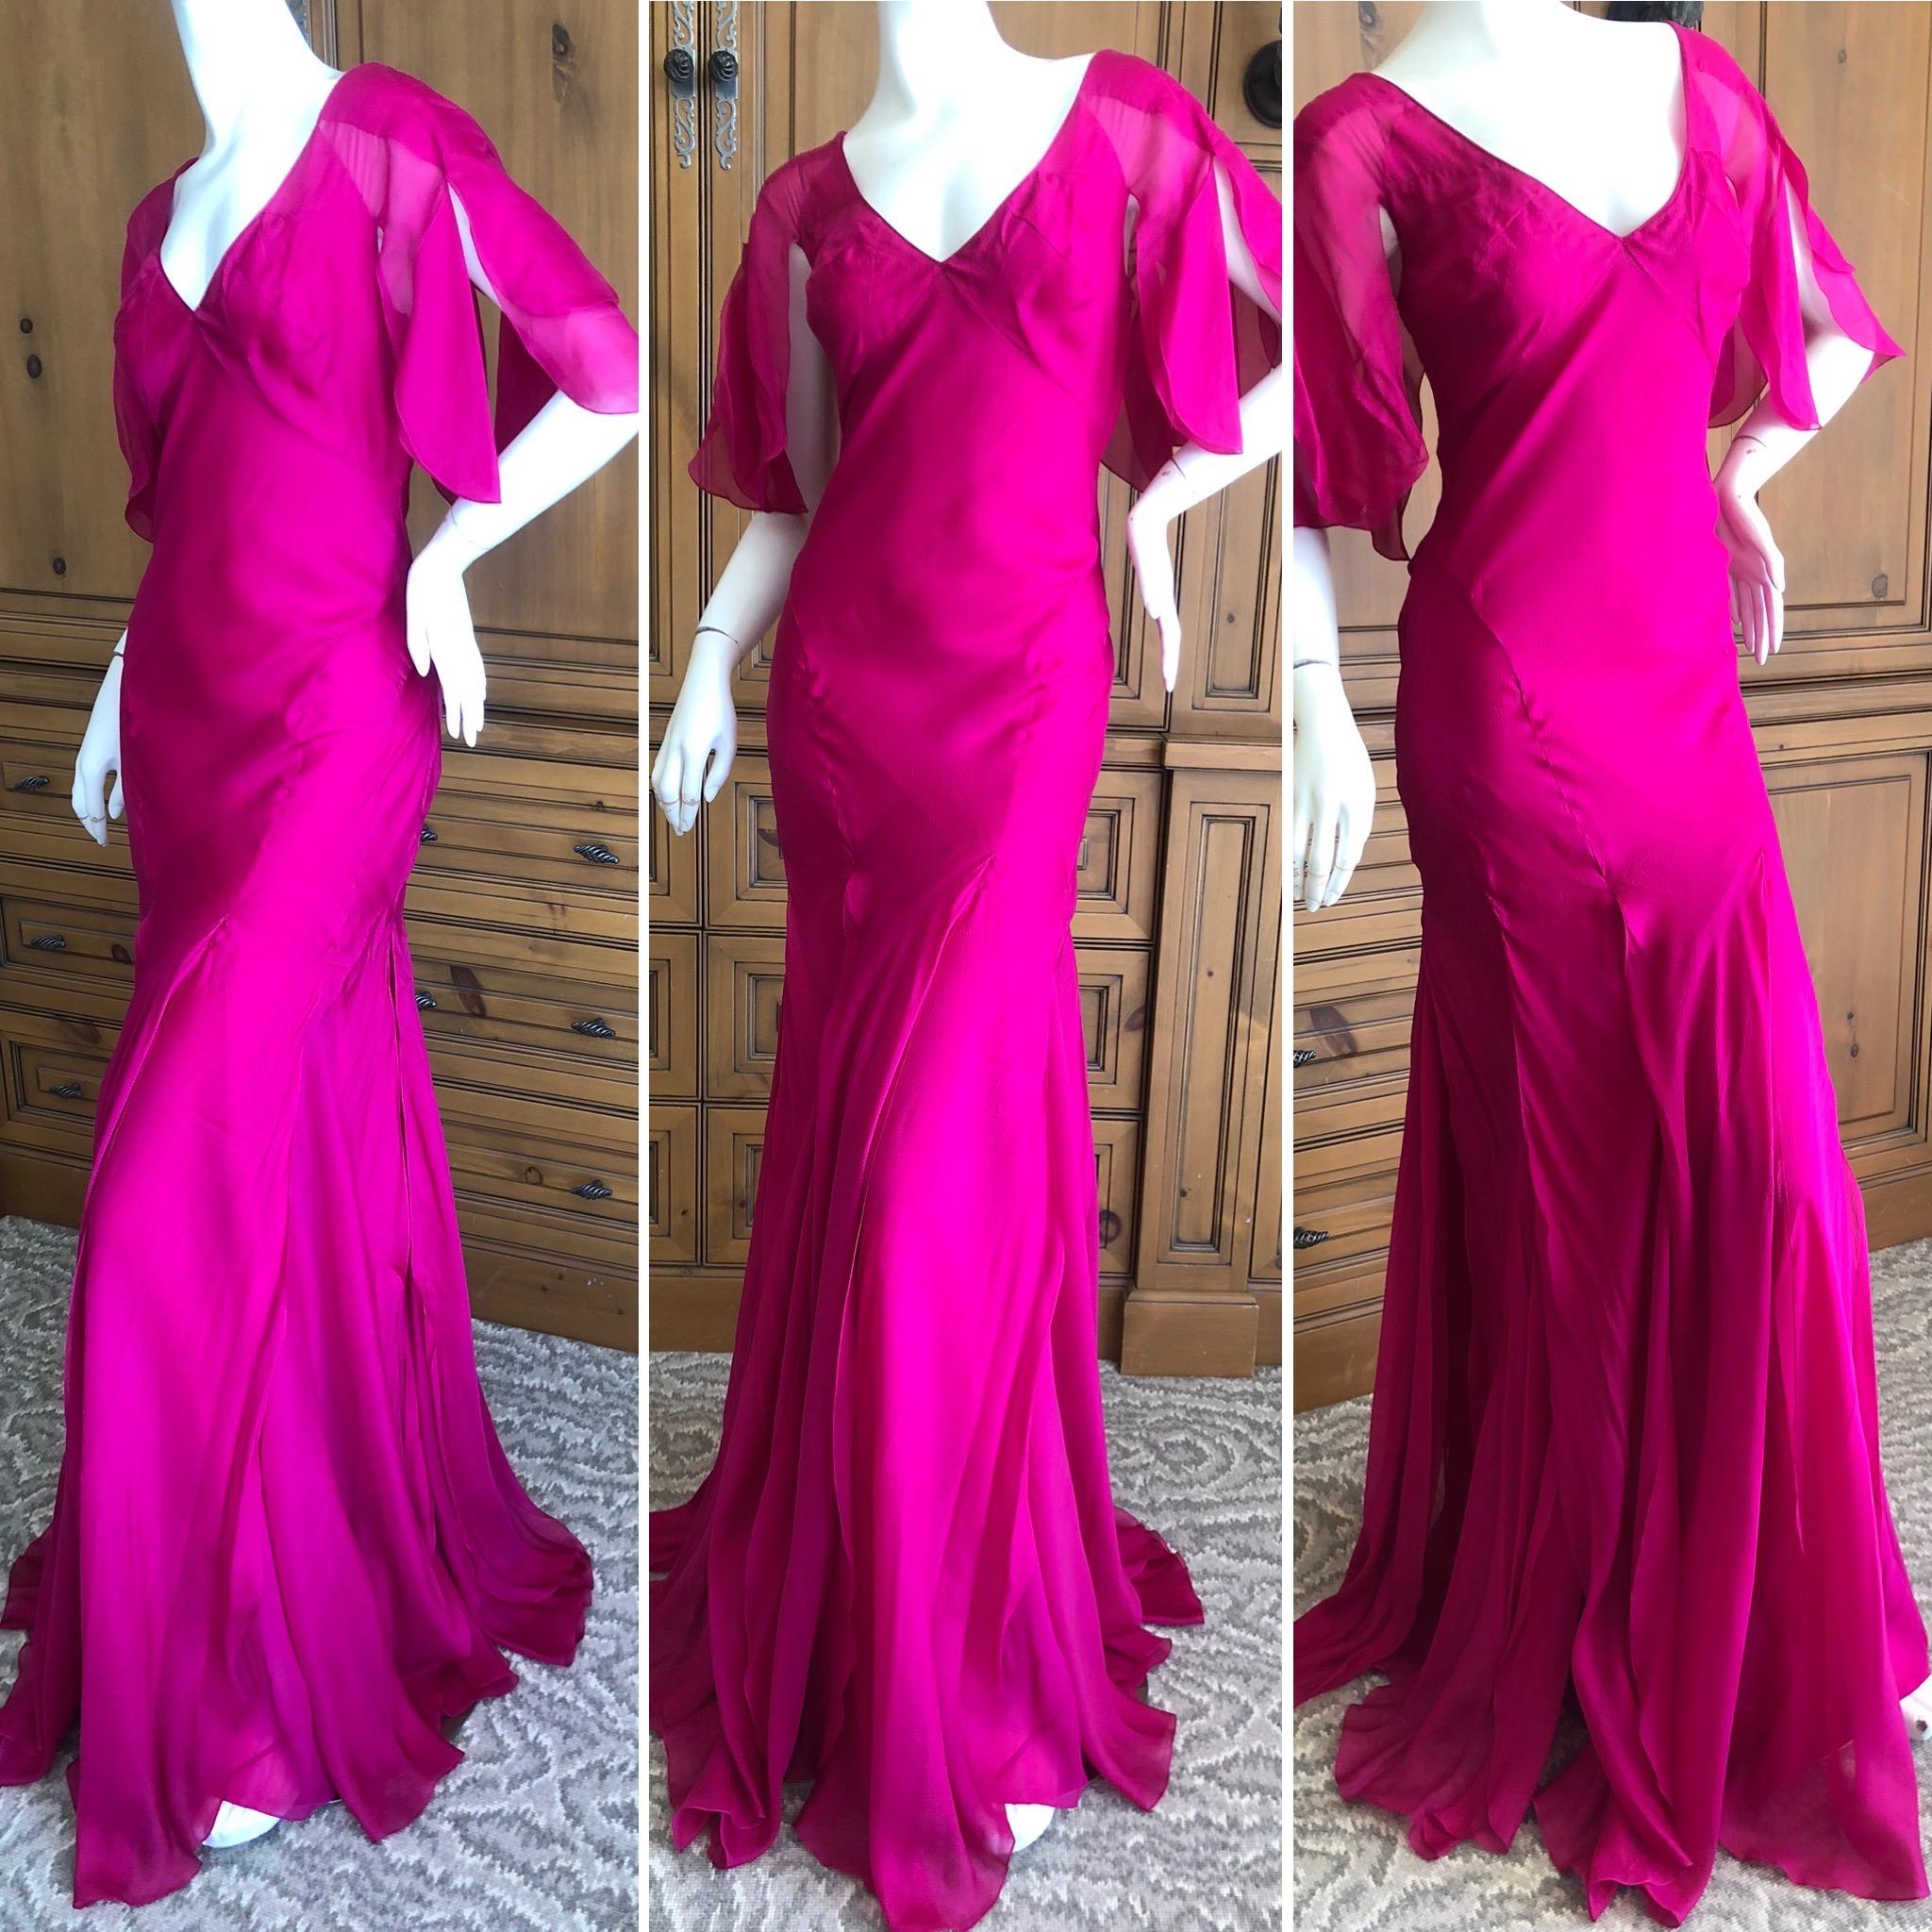   John Galliano Vintage Bias Cut Hot Pink Silk Evening Dress
This is so pretty, with 